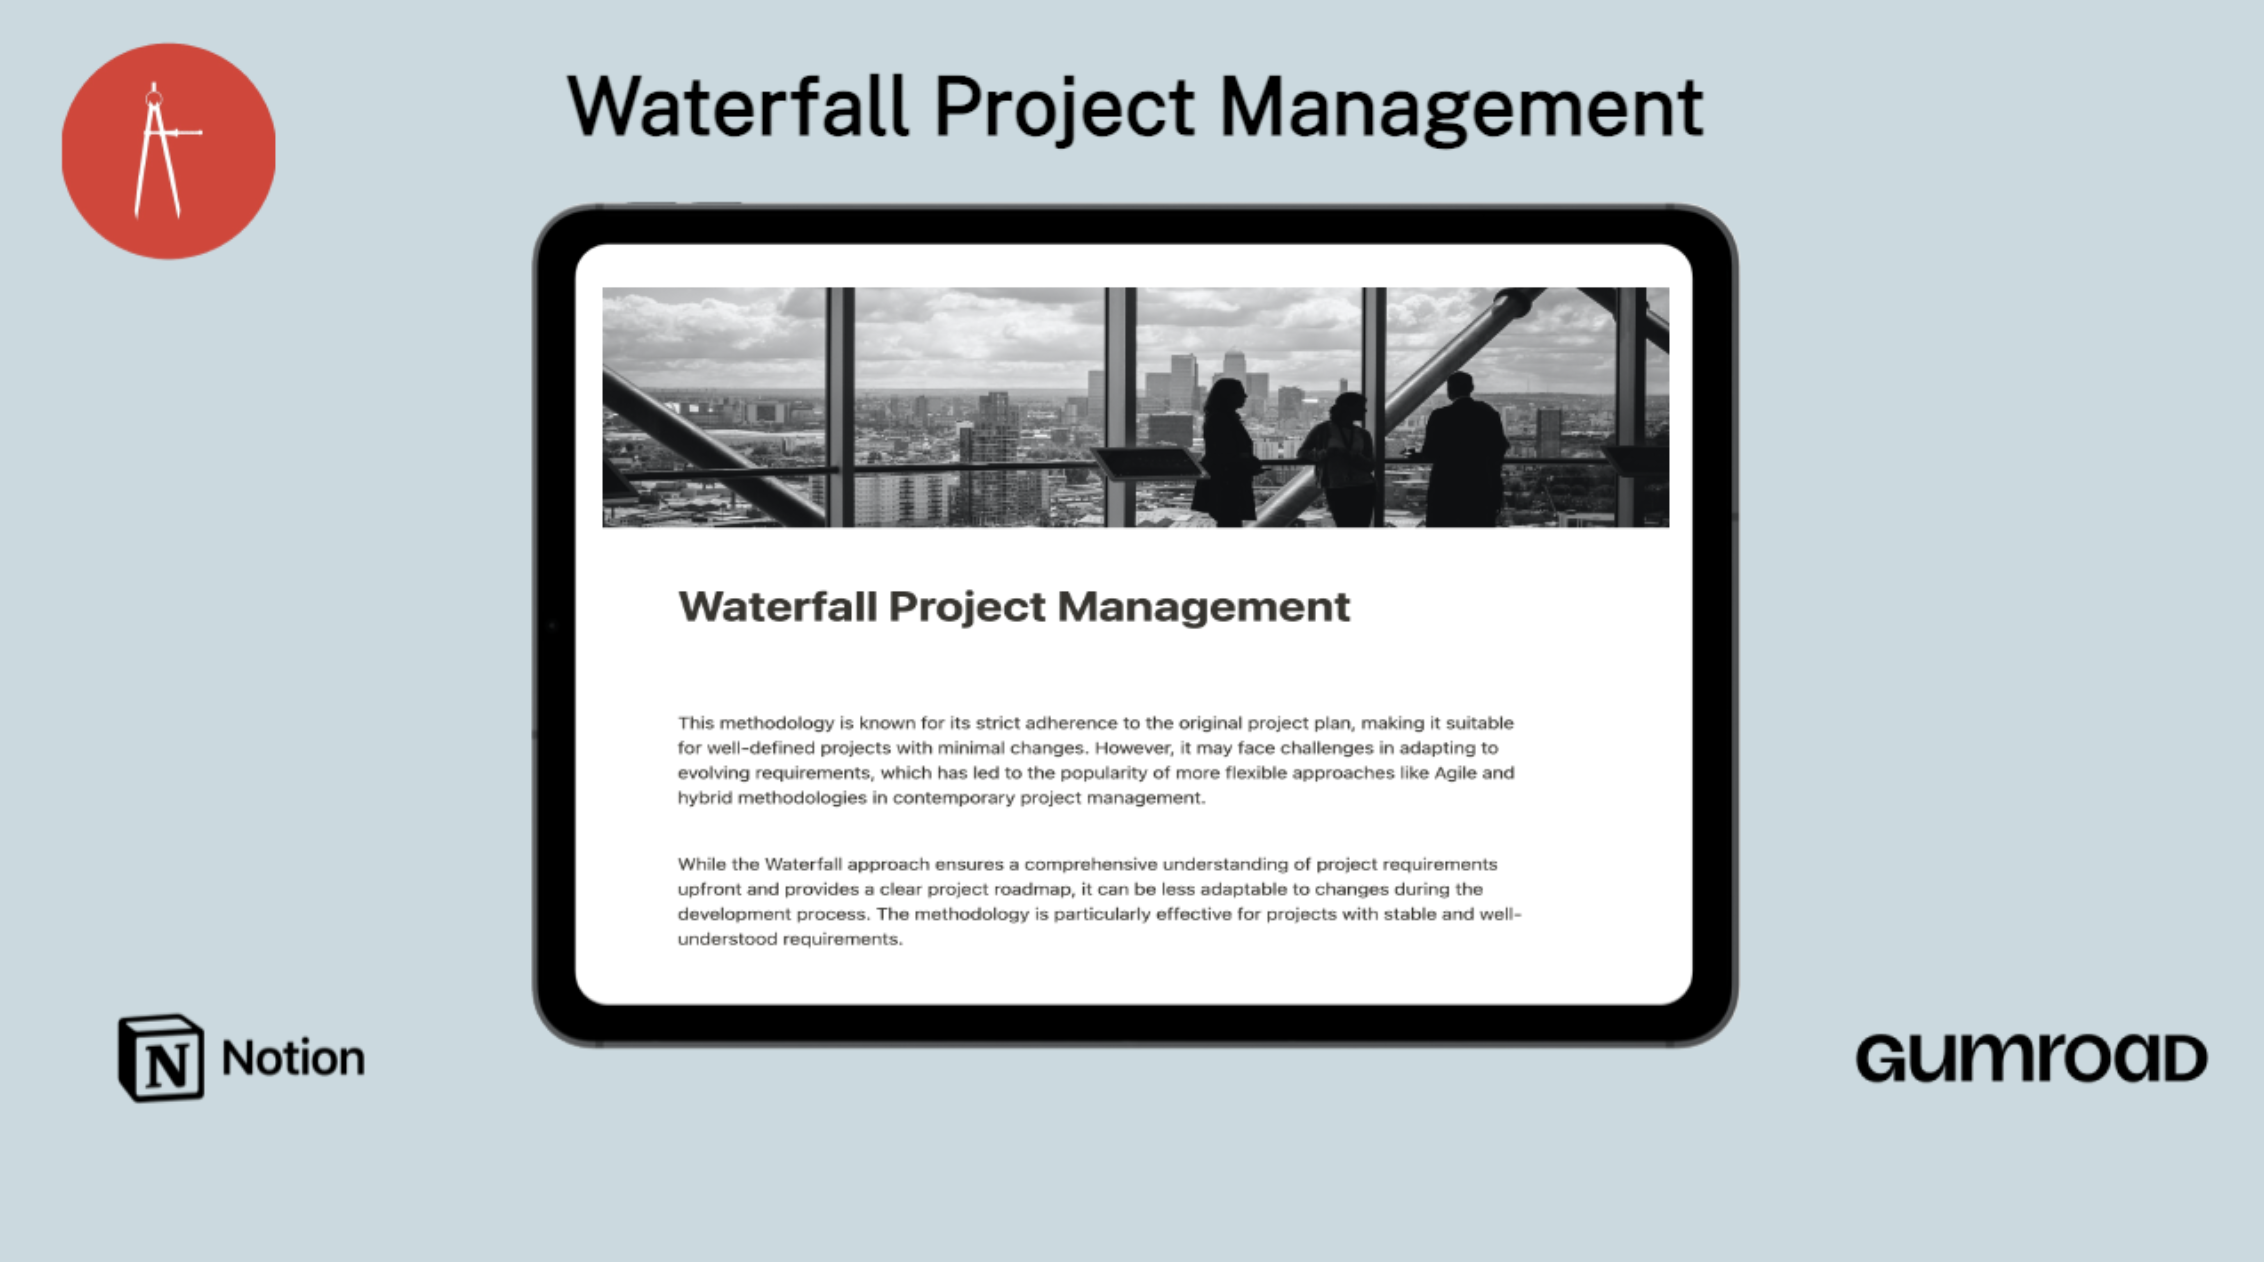 An industry standard model with specific Project phases and their according Deliverables for managing any Waterfall Project. 




